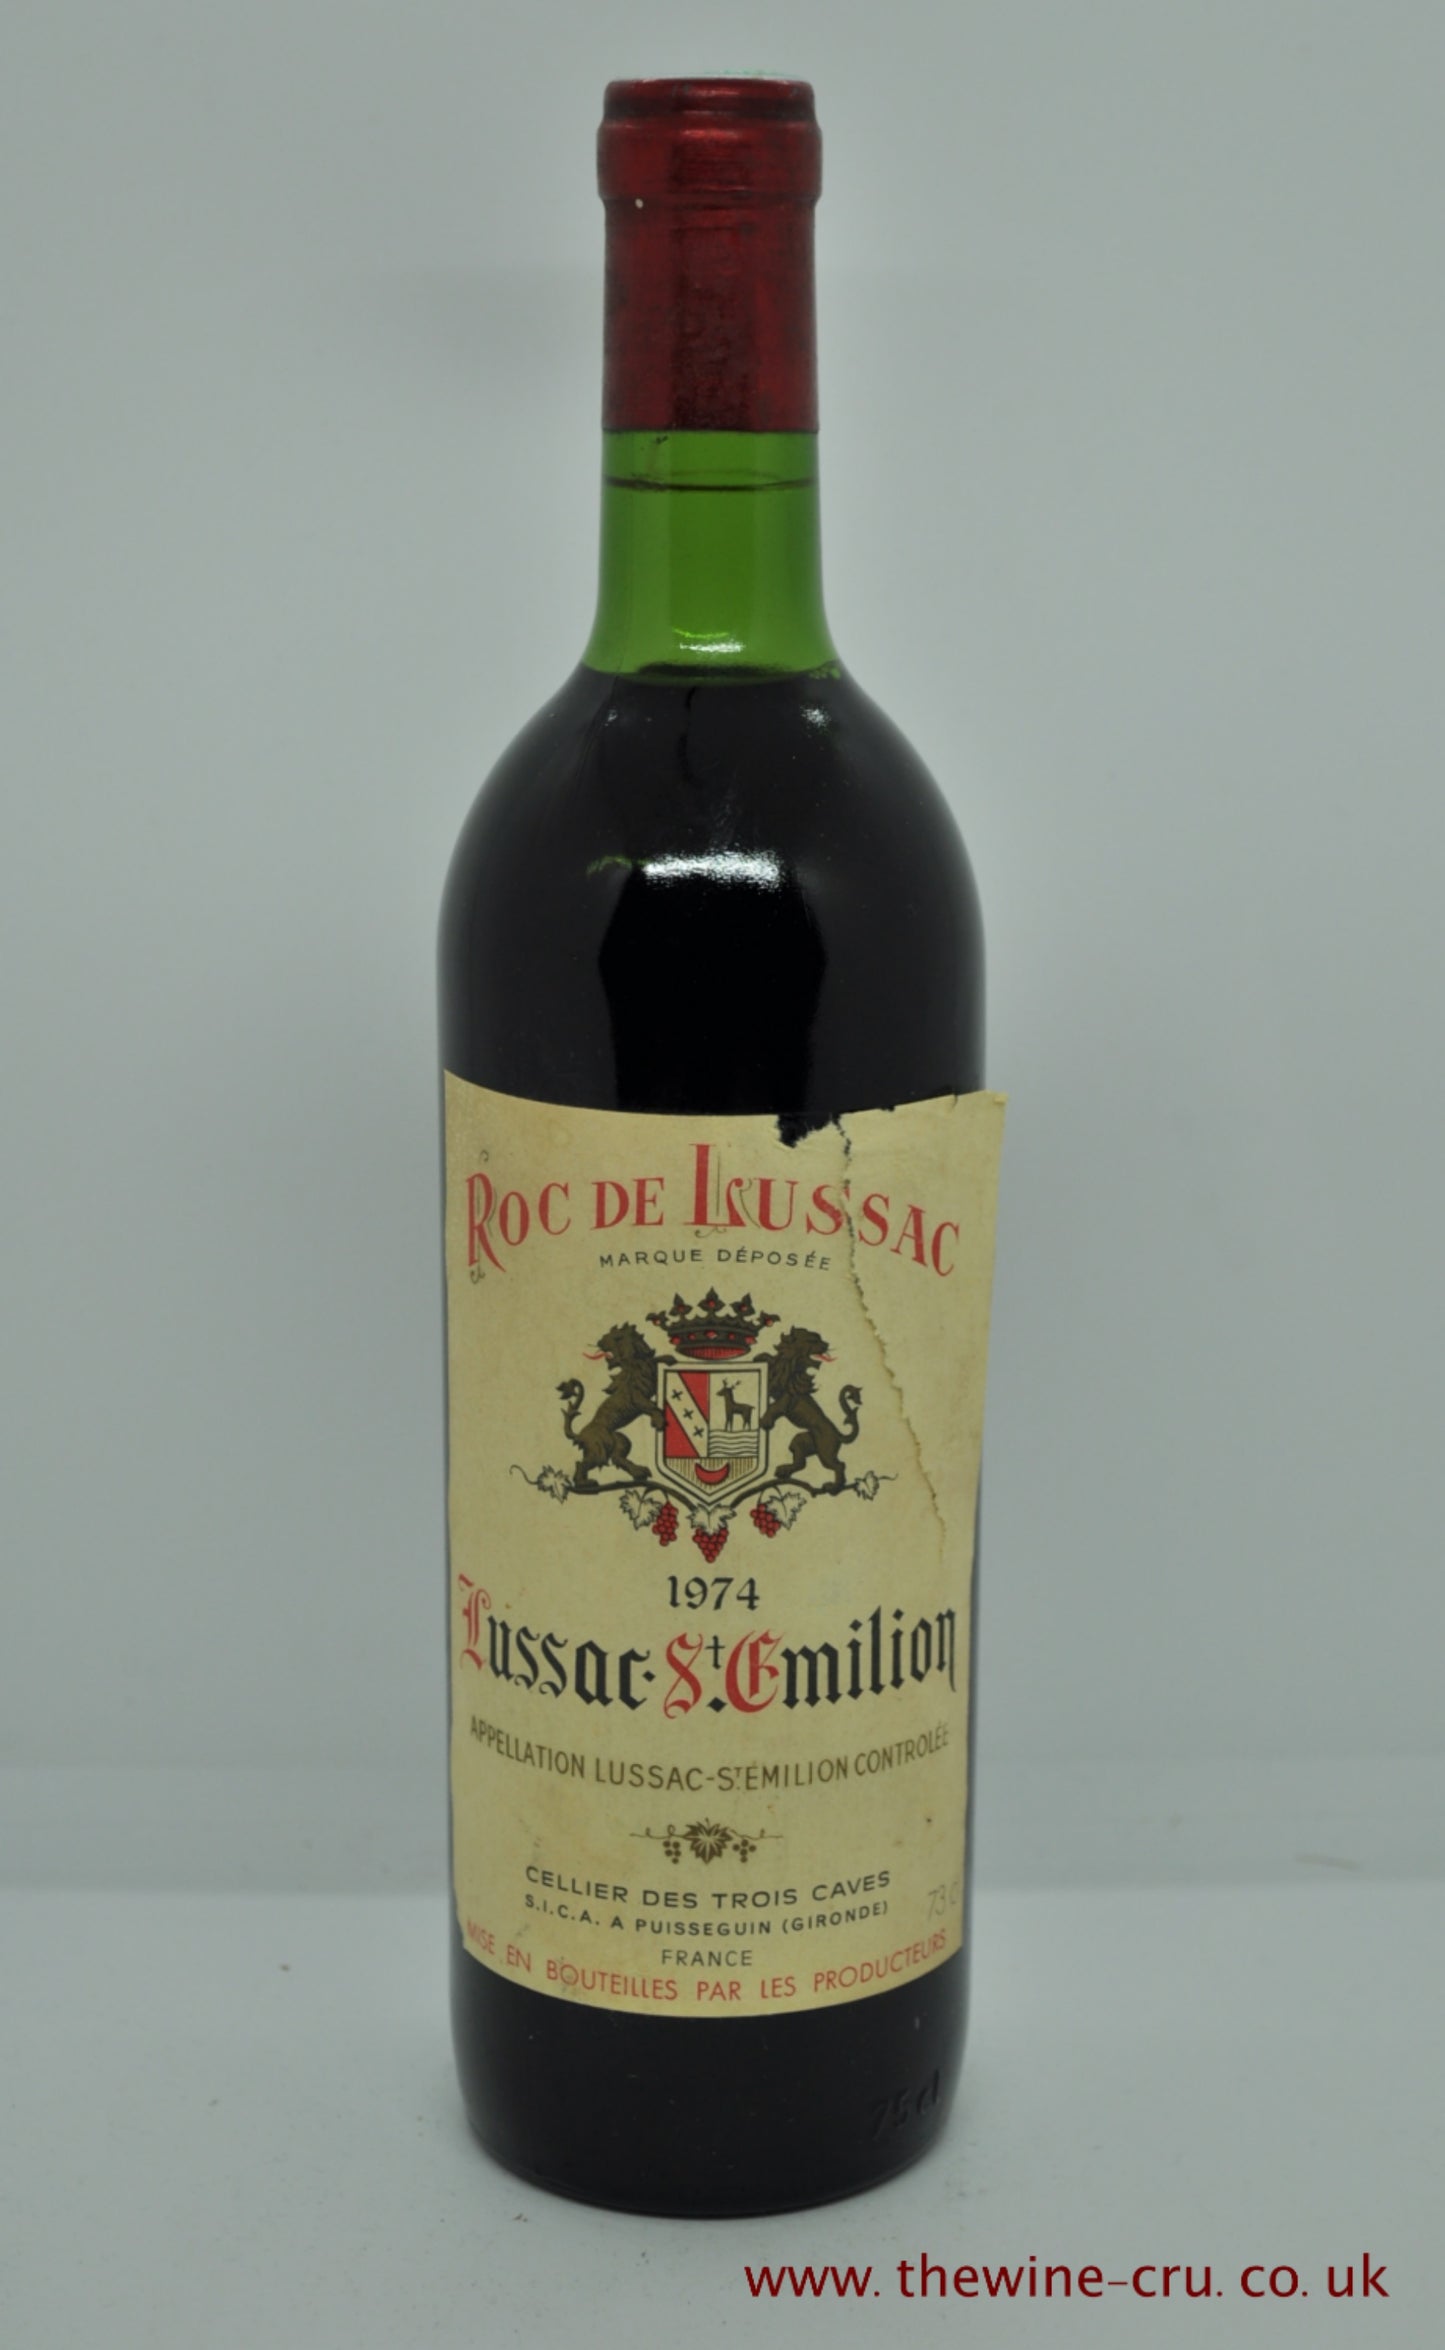 A bottle of 1974 vintage red wine. Roc de Lussac Bordeaux, France. The bottle is in good condition. The label is torn and loose. The wine level being top shoulder. Immediate delivery. Free local delivery. Gift wrapping available.